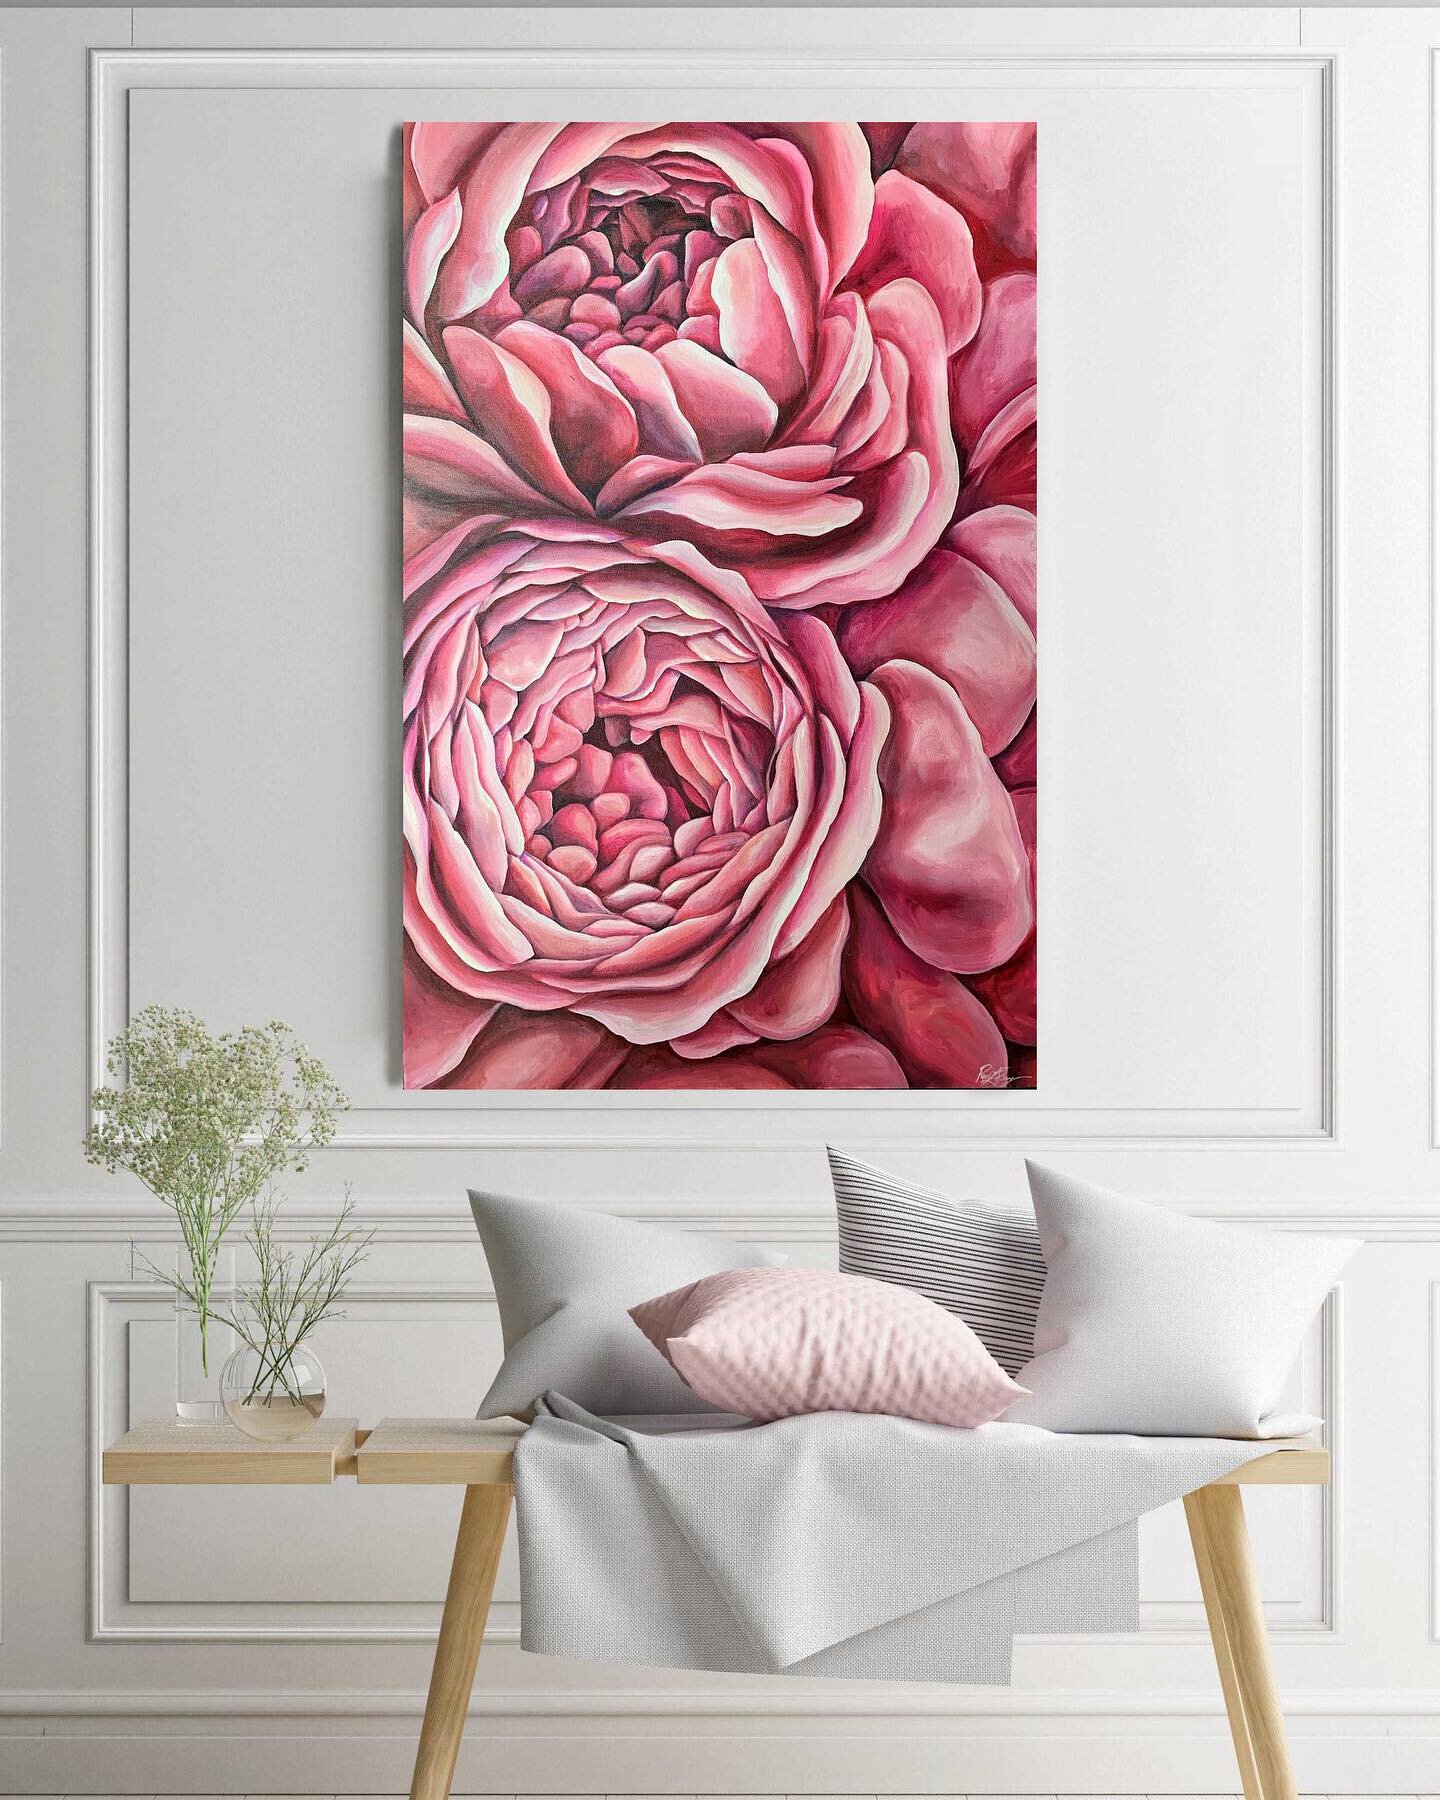 Pink Peonies is finished and up for sale on my website! 💖Link is in my bio or google www.rlynnstudio.com. 🌸
This is the first of my Garden Series and she&rsquo;s beautiful! I&rsquo;m so please with how she turned out. She&rsquo;s a large painting 2